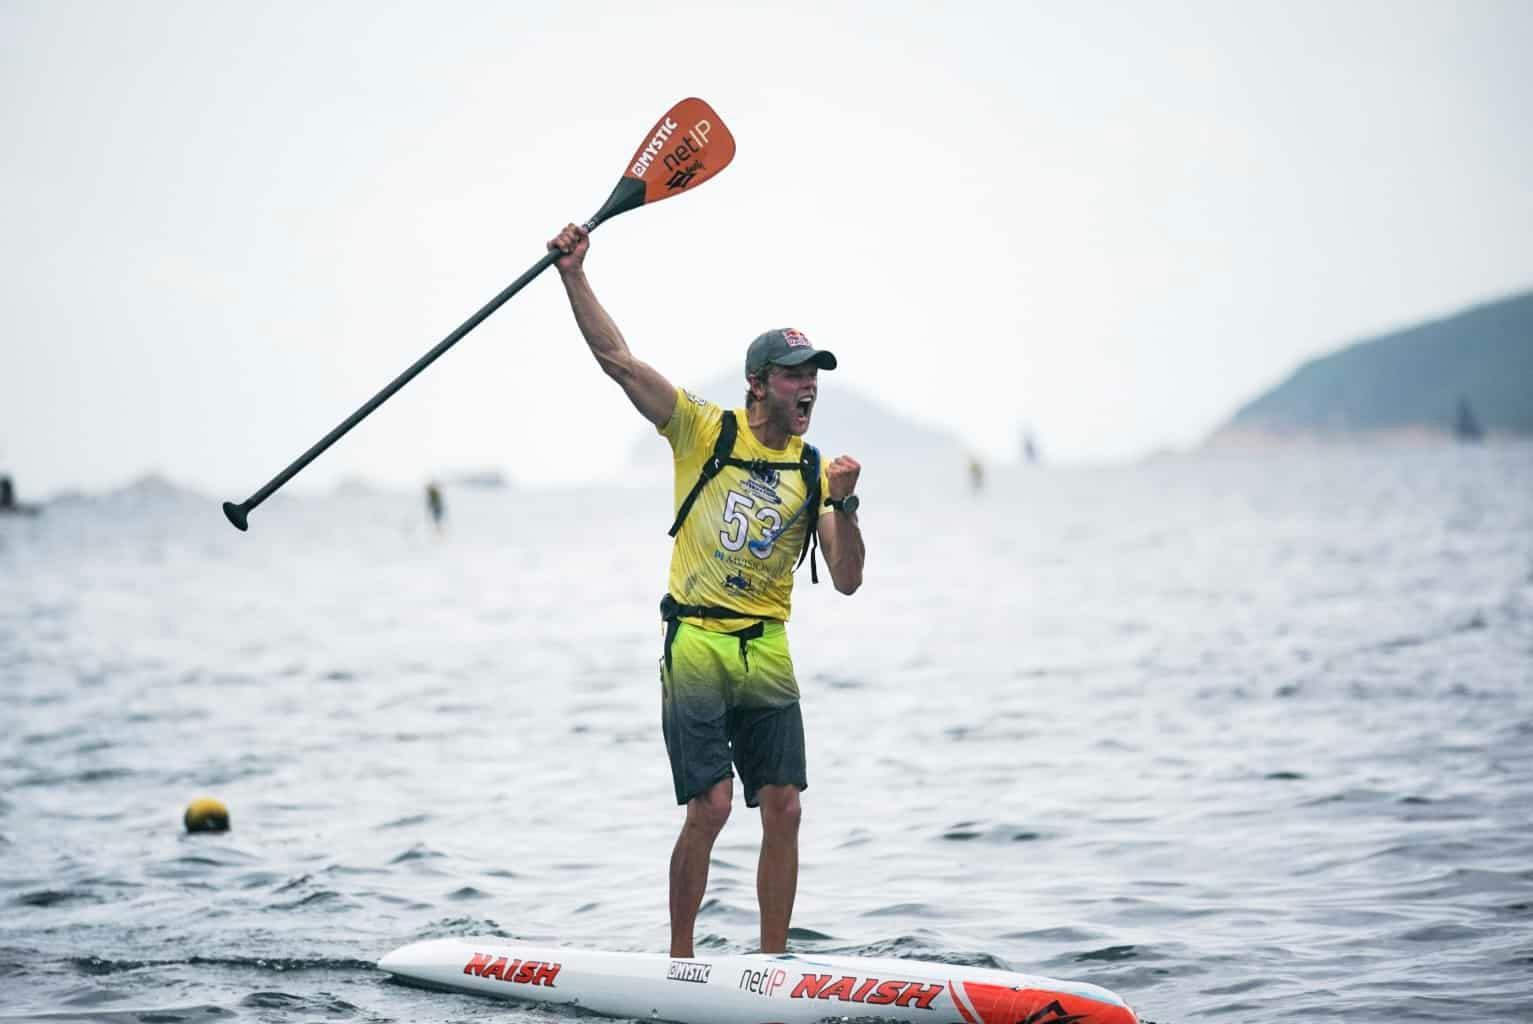 Casper Steinfath Rockets the 2020 Javelin to a Come-from-behind Win at Hong Kong International SUP Championships - Naish.com